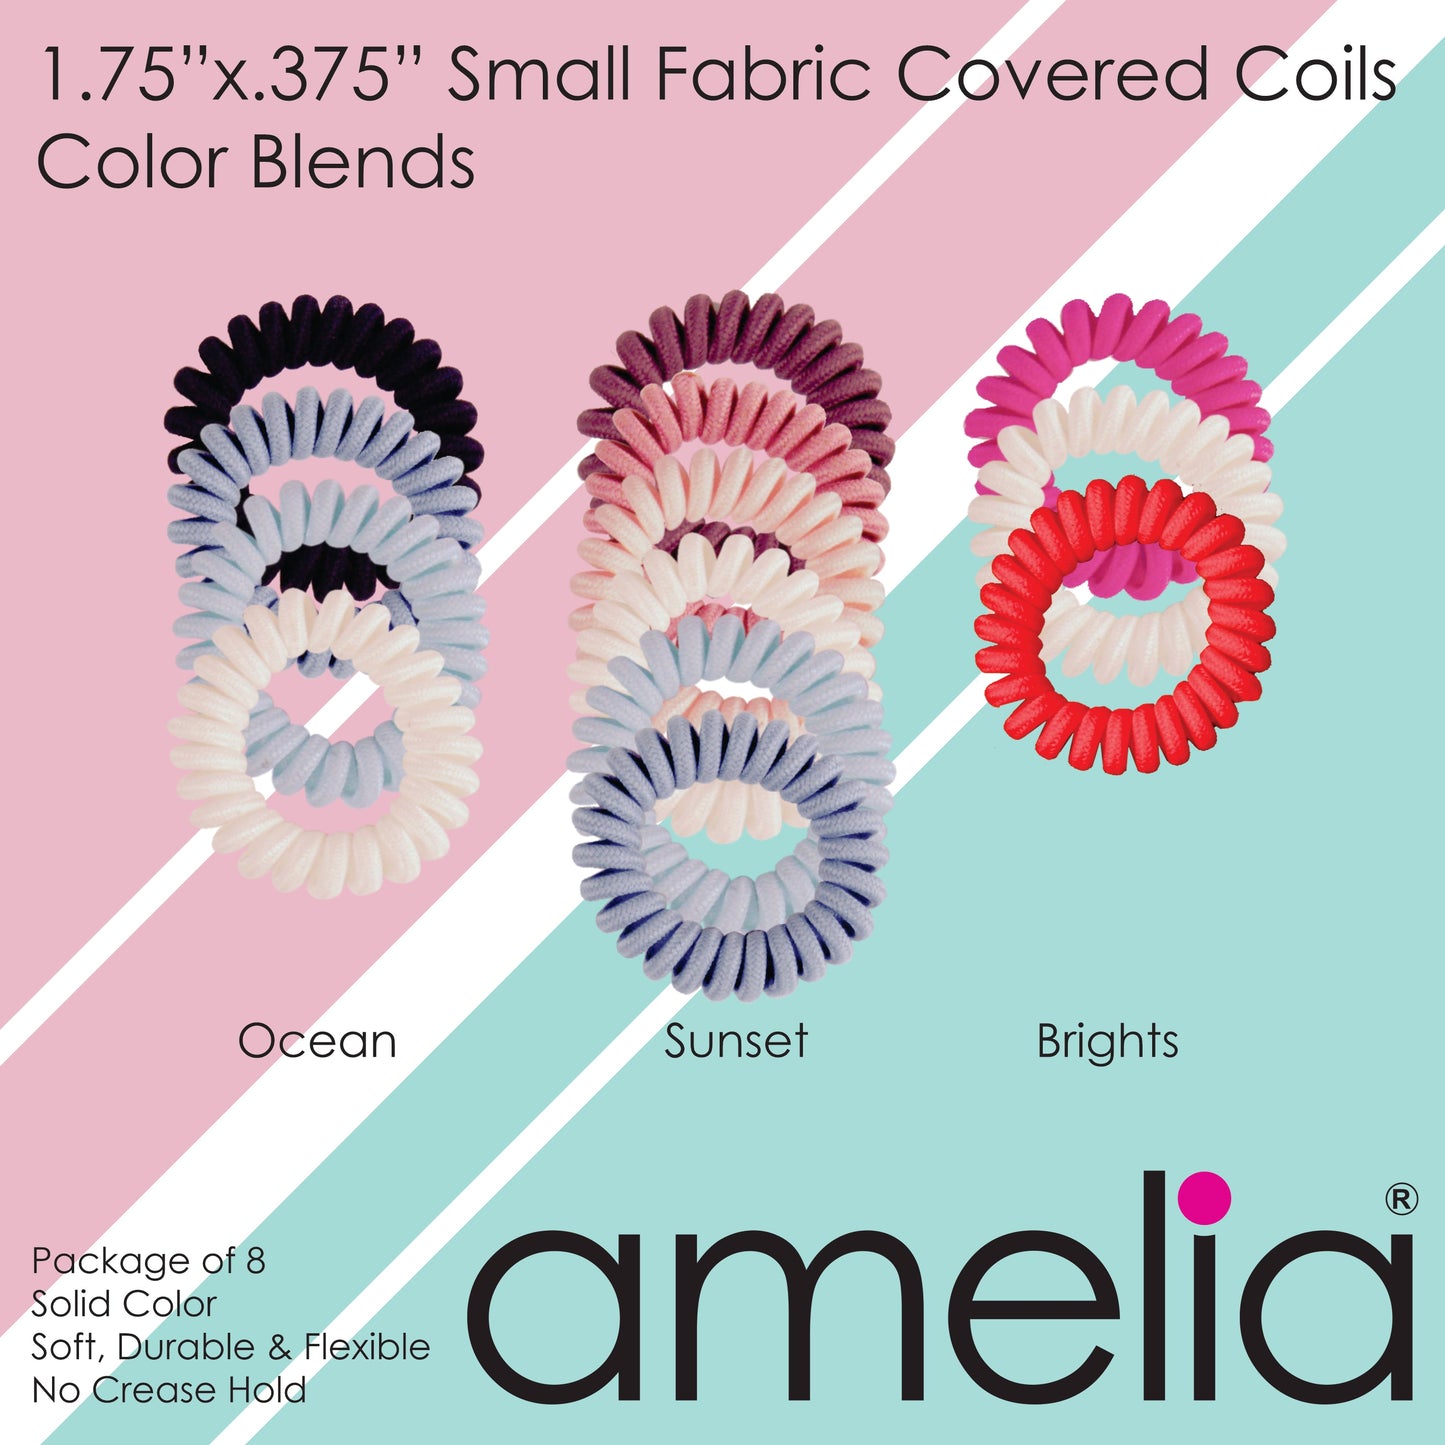 Amelia Beauty, 8 Small Fabric Wrapped Elastic Hair Coils, 1.75in Diameter Spiral Hair Ties, Gentle on Hair, Strong Hold and Minimizes Dents and Creases, White with Black Stripe